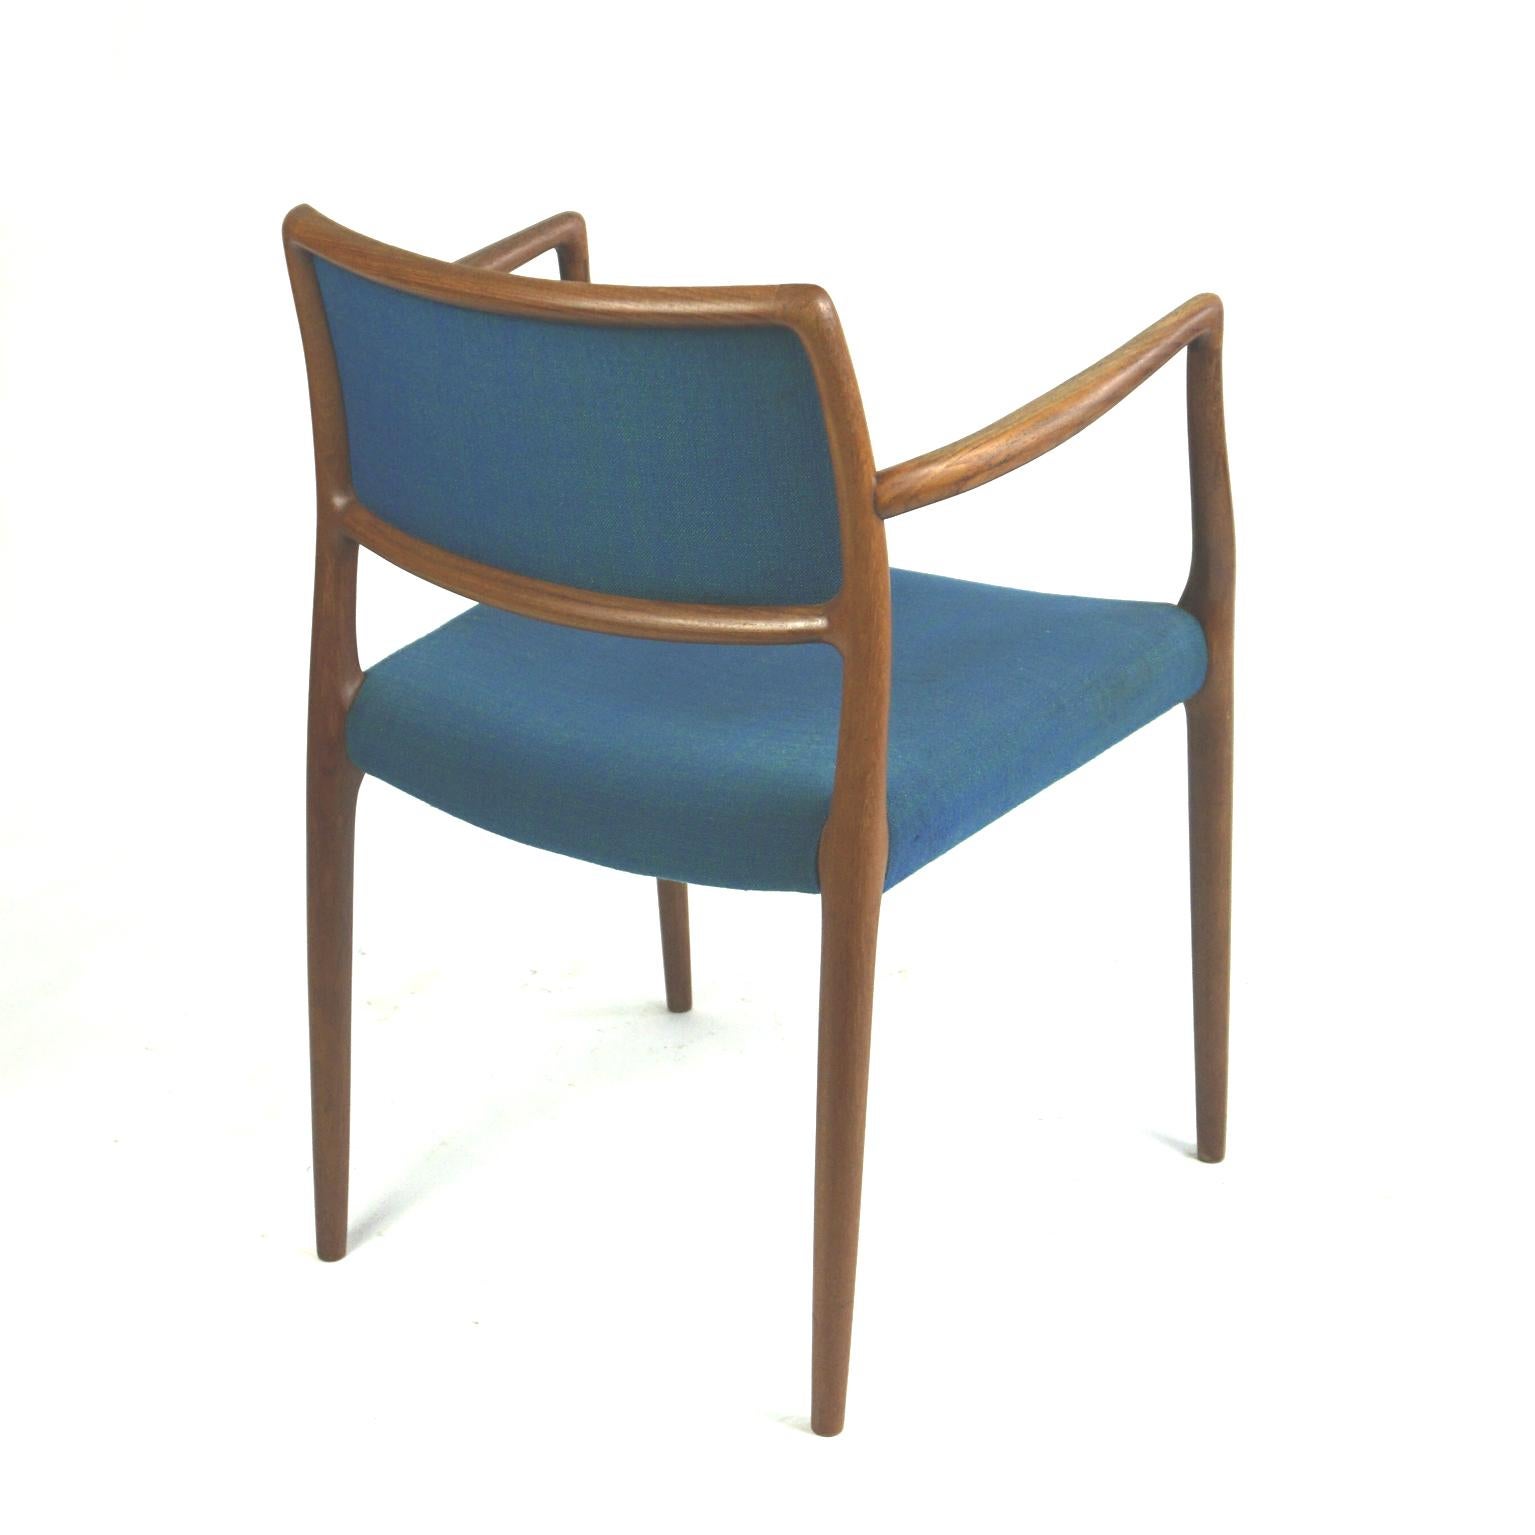 Mid-20th Century Scandinavian Mod. 65 Teak and Blue Fabric Armchair by Niels Otto Moller